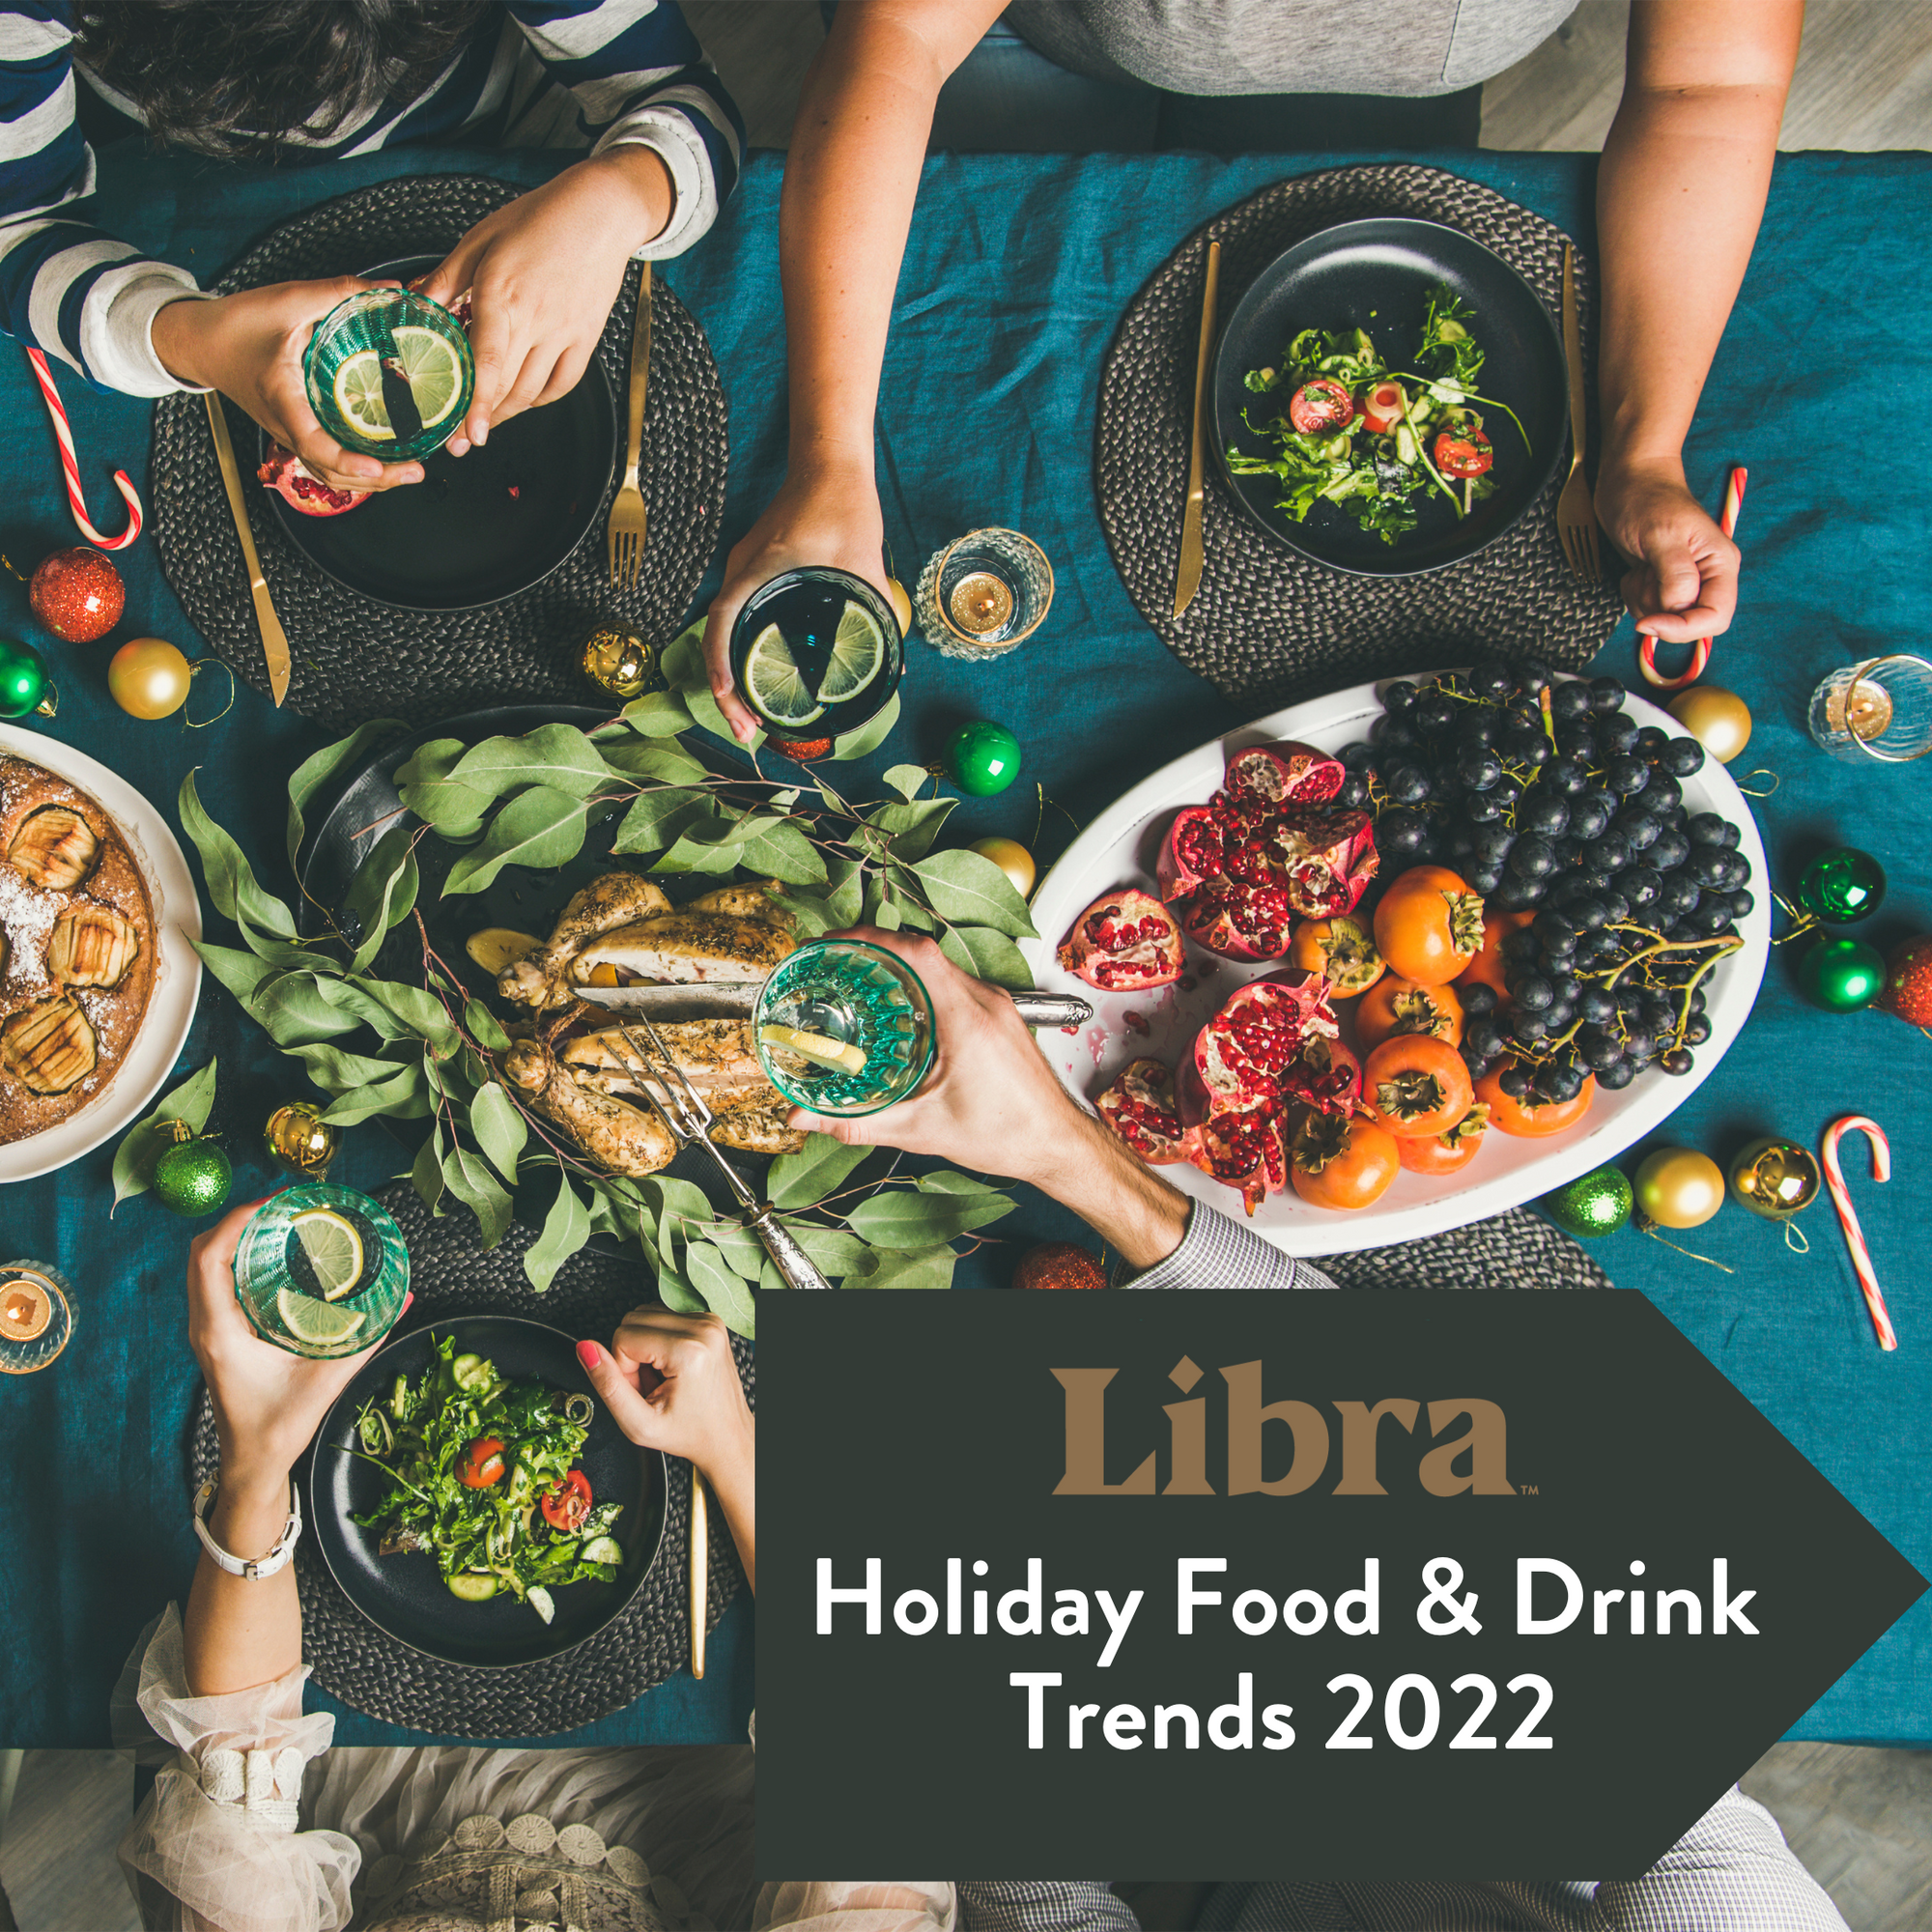 Food & Drink Trends For Hosting This Year